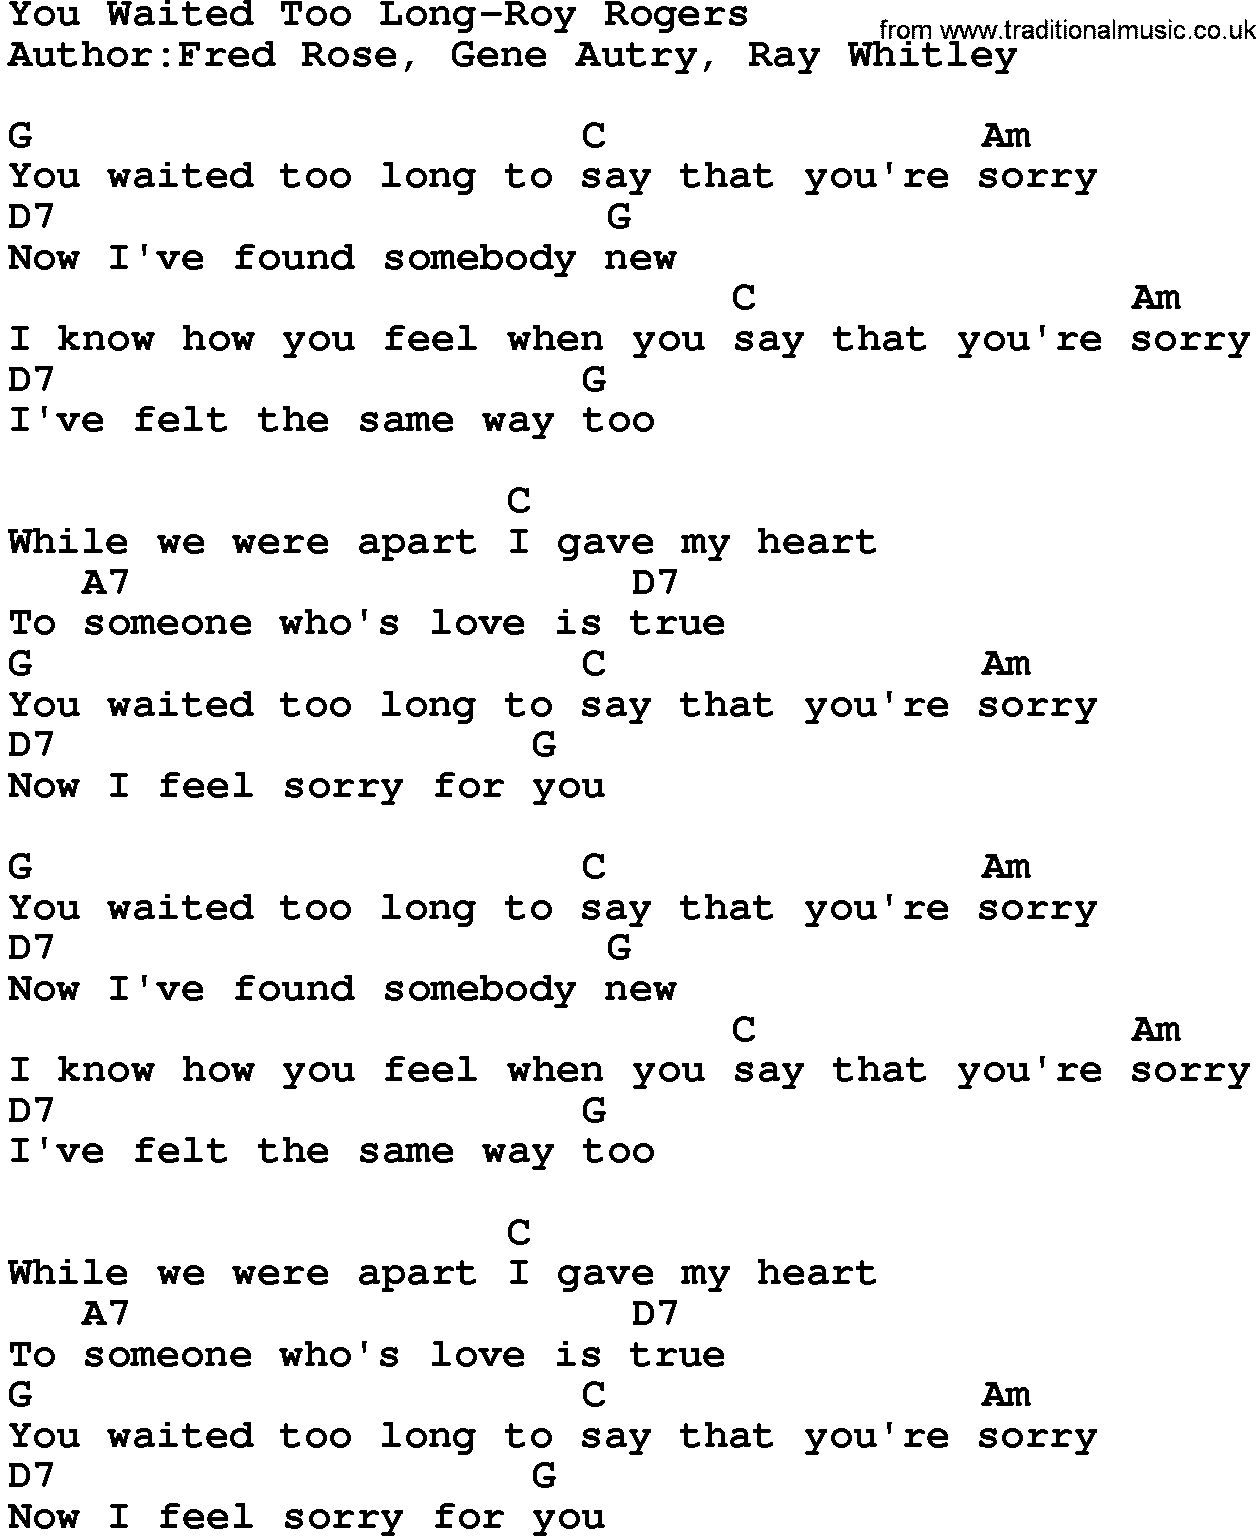 Country music song: You Waited Too Long-Roy Rogers lyrics and chords